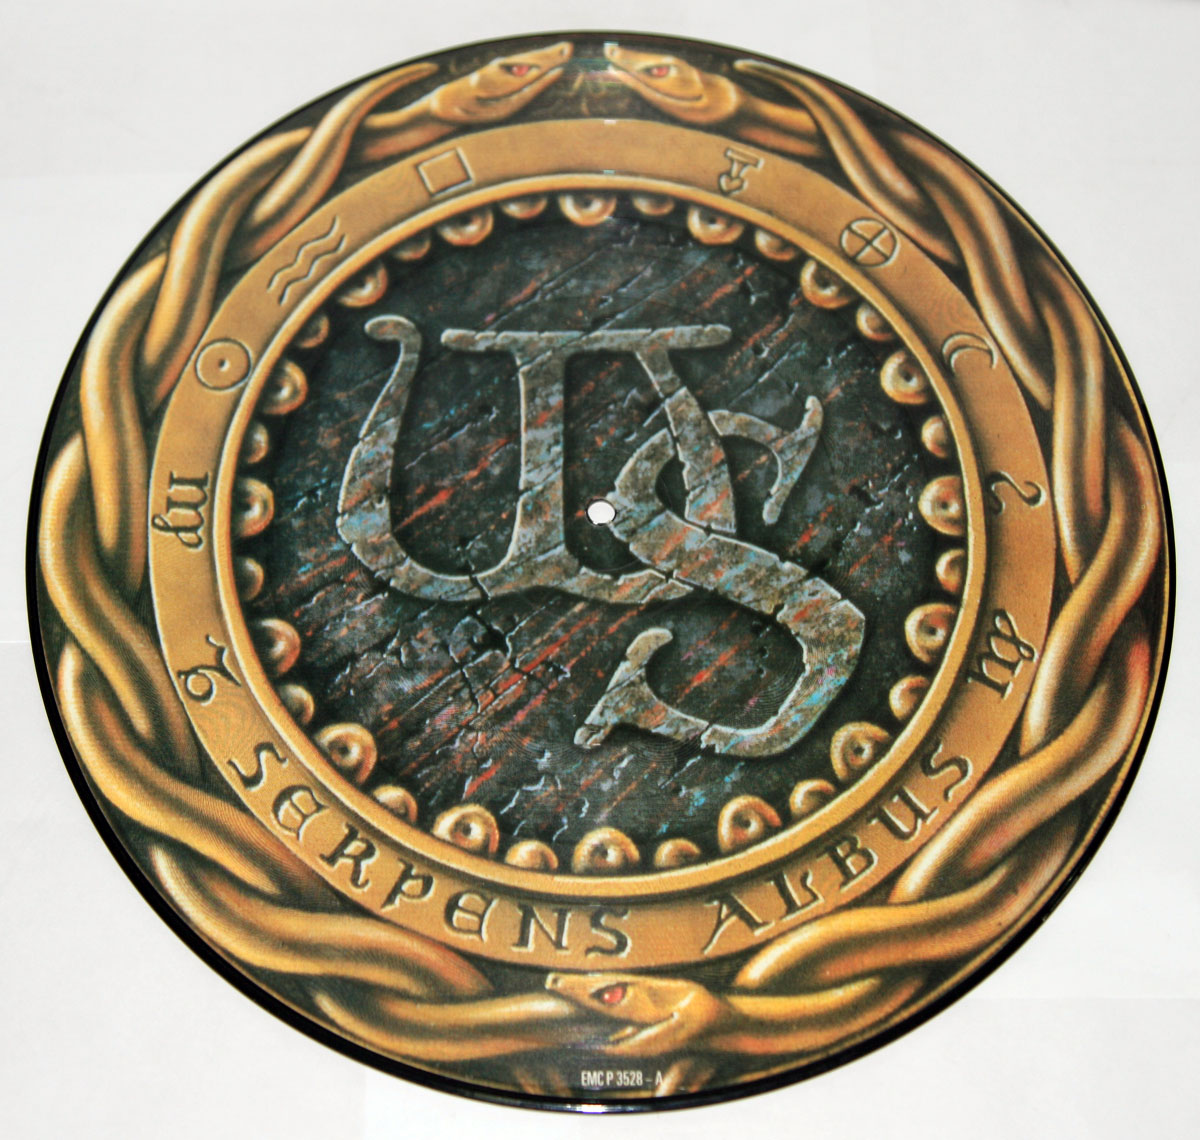 High Resolution Photos of whitesnake picture disc pd 